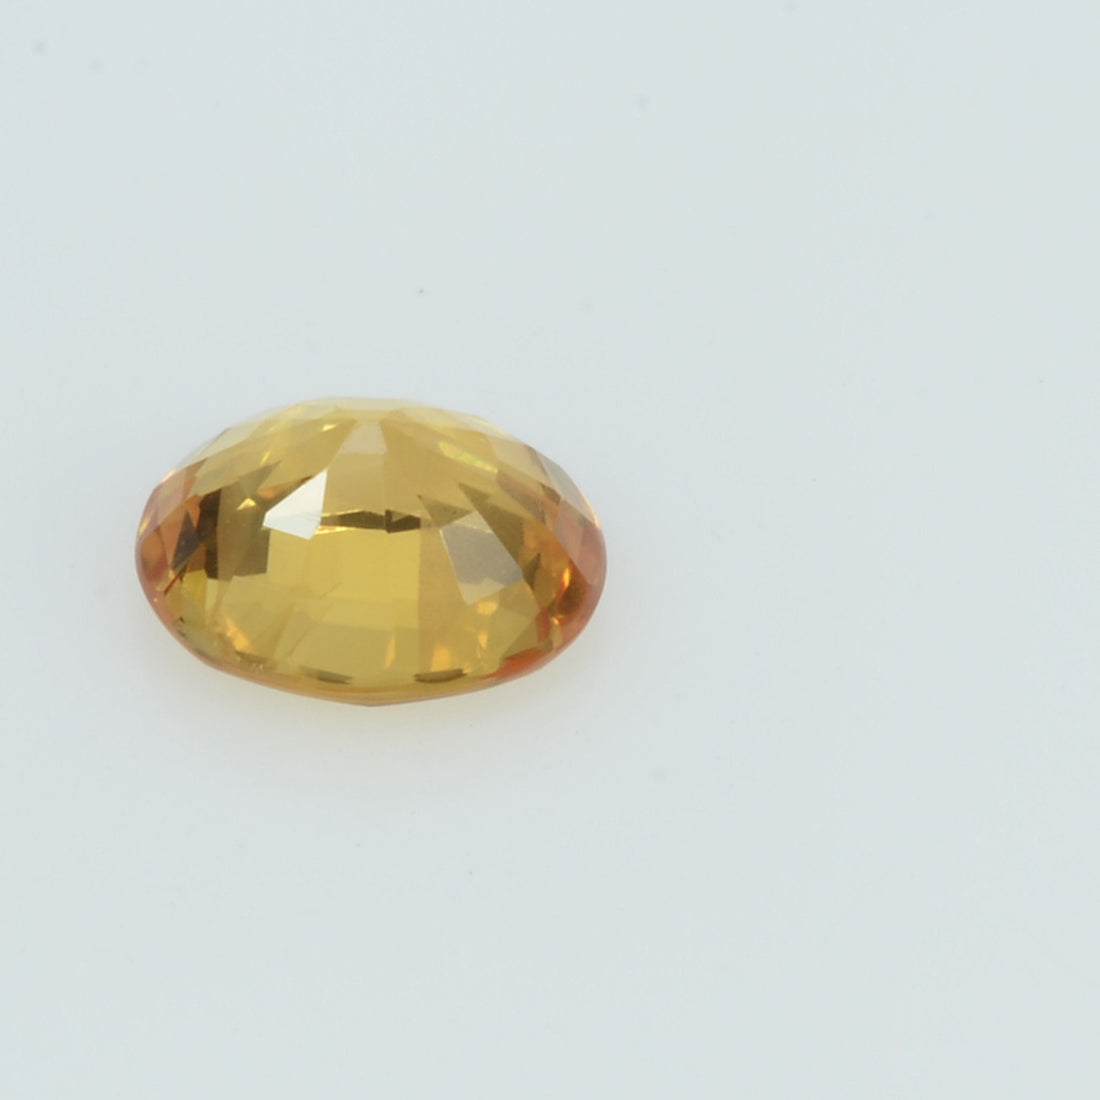 0.83 Cts Natural Yellow Sapphire Loose Gemstone Oval Cut